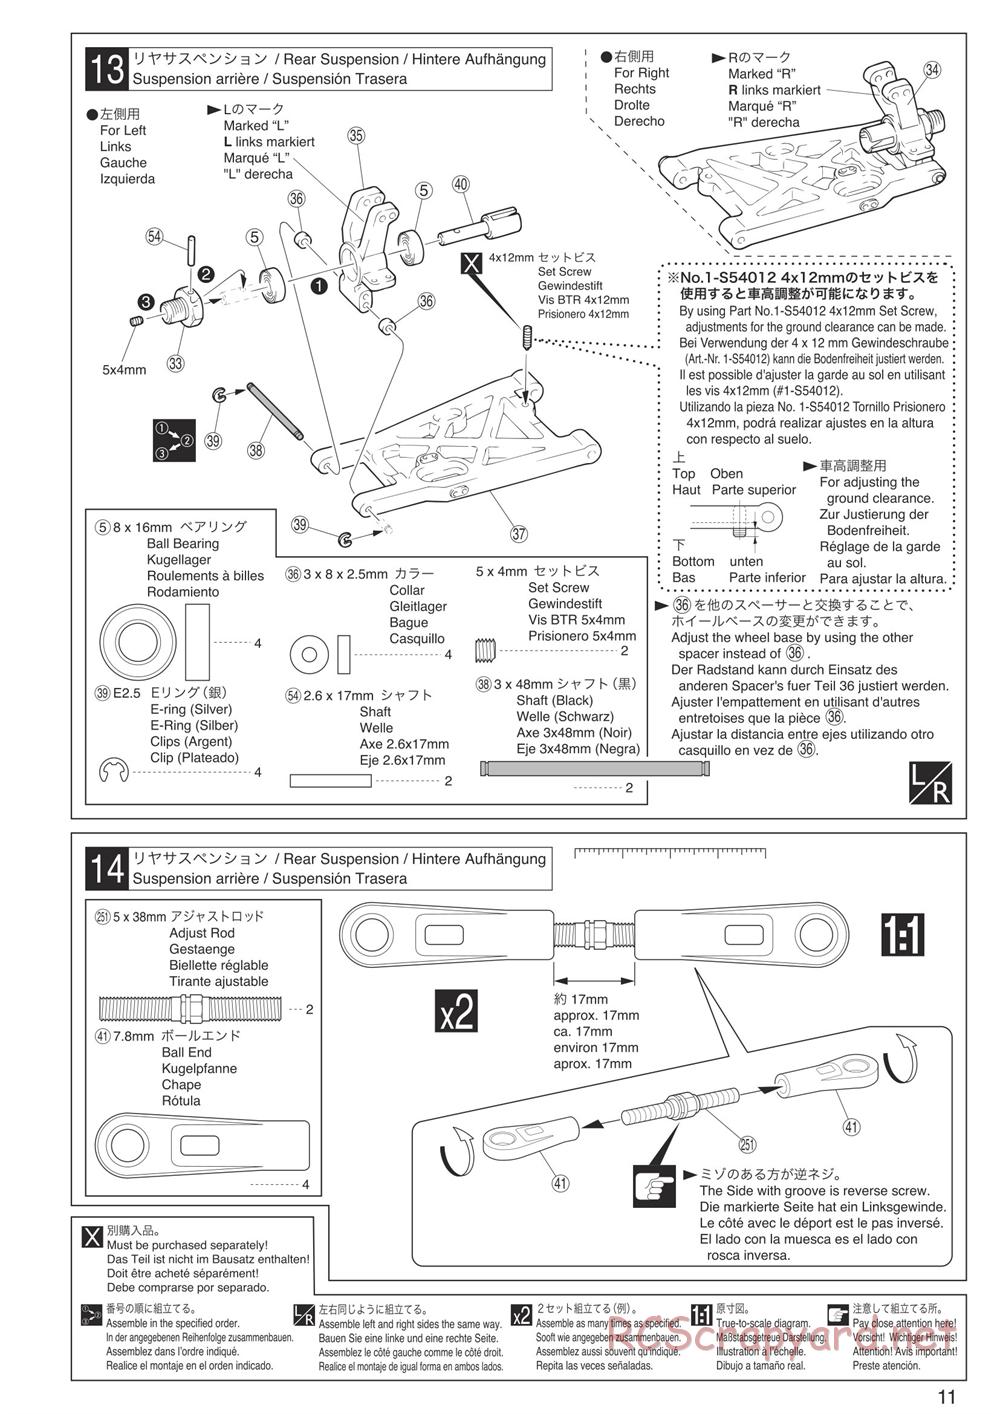 Kyosho - Inferno Neo Race Spec - Manual - Page 11